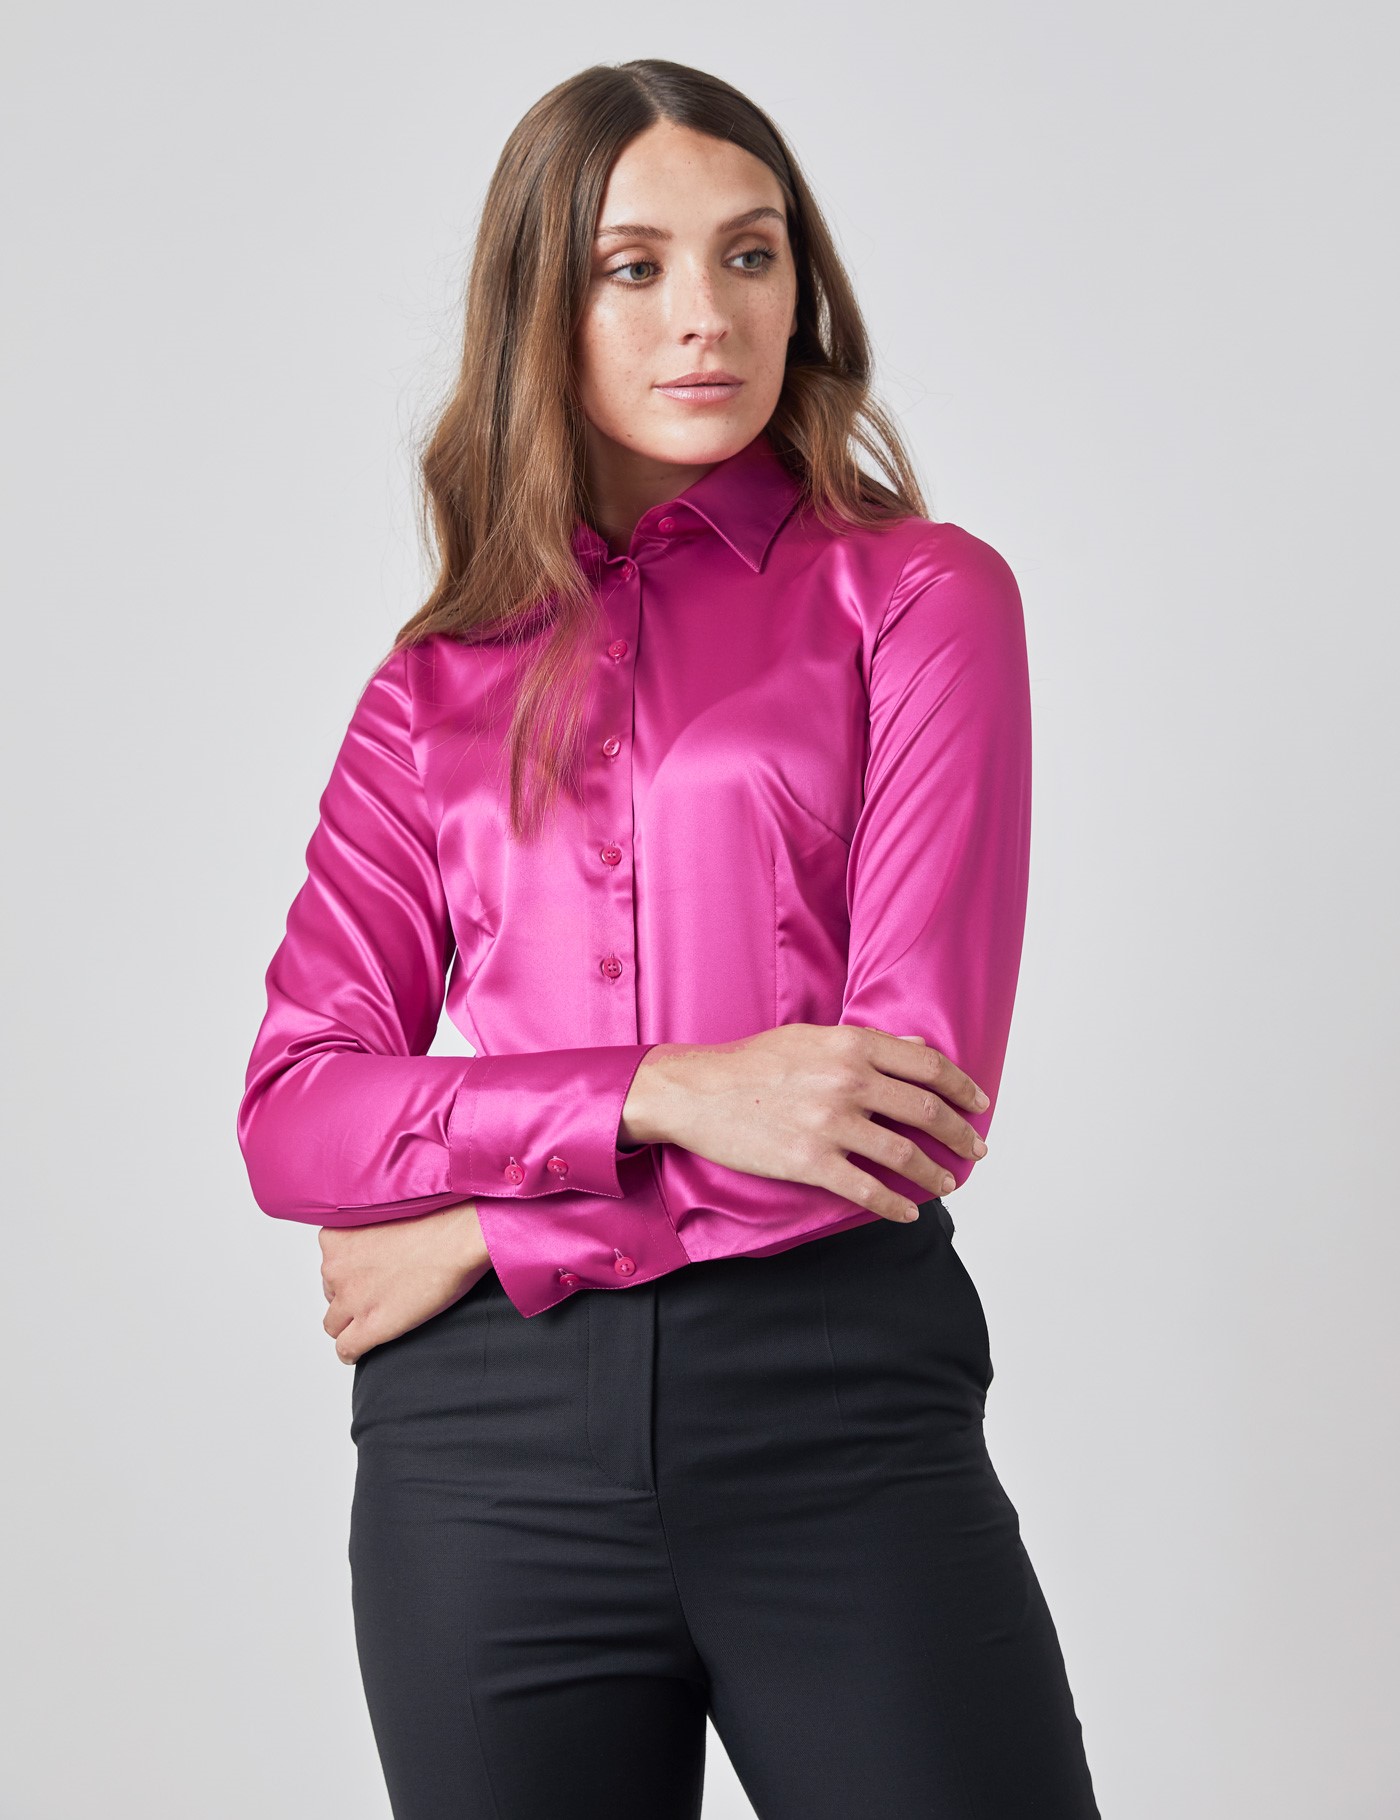 Plain Satin Stretch Women's Fitted Shirt with Single Cuff in Bright ...